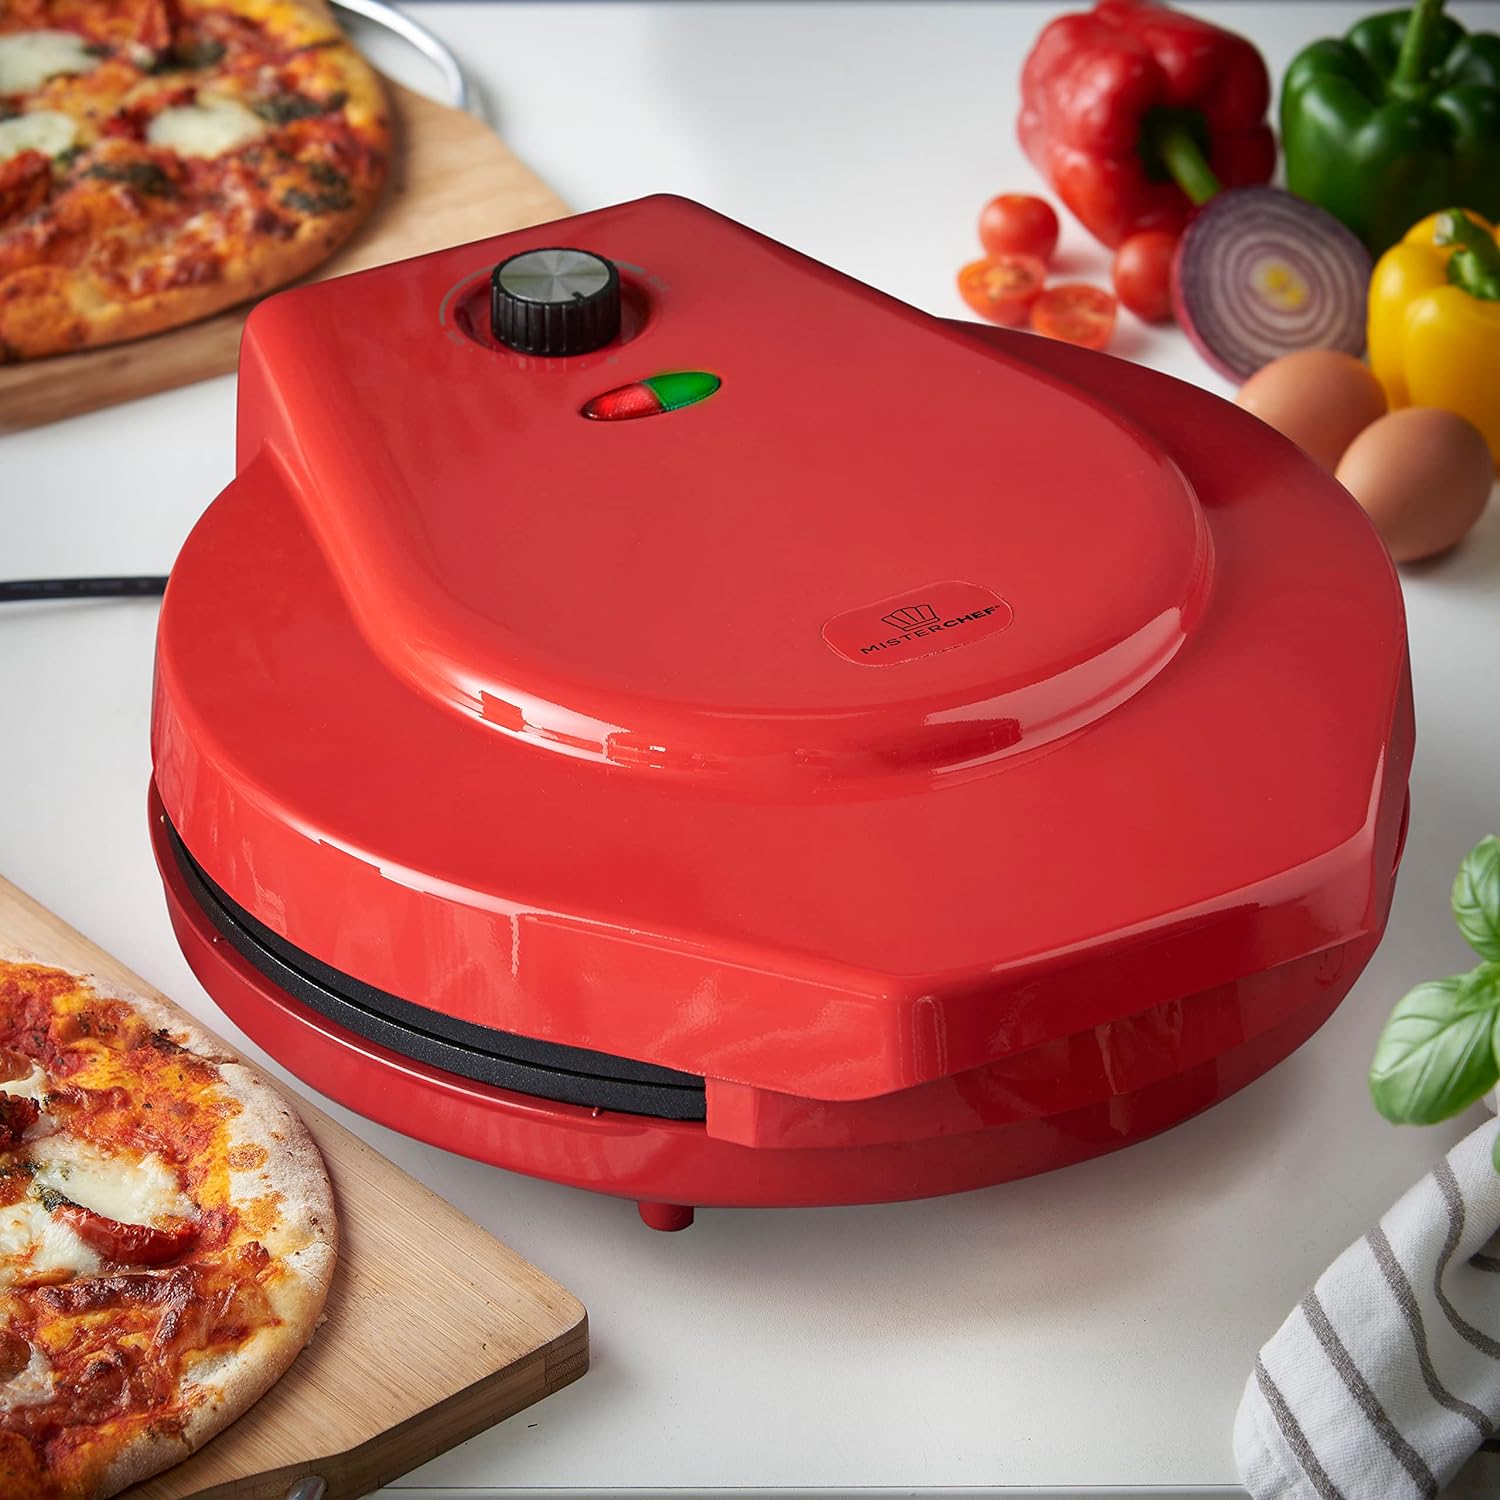 MisterChef Electric Pizza Maker 1400W, Indoor Portable Pizza Oven, Crepe, Pancake and Omelette Maker, 12 Inch / 30cm, Energy Efficient, Free Recipe Book Enclosed, 2 Year Warranty